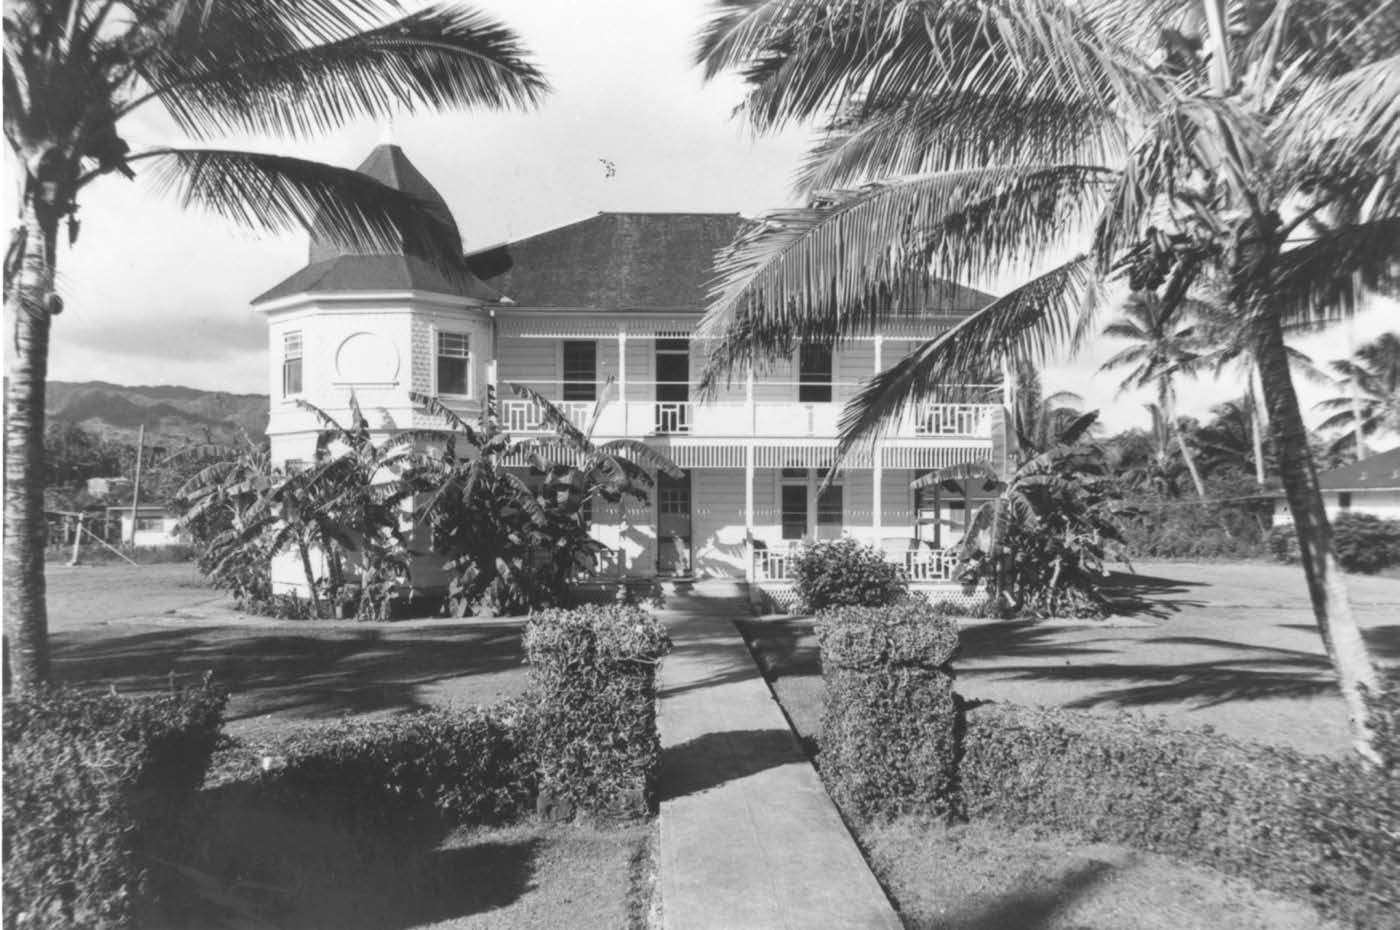 The Lanihuli house was renovated in the early 1930s and would serve as temple housing for the following two decades. Courtesy of BYU–Hawaii Archives.